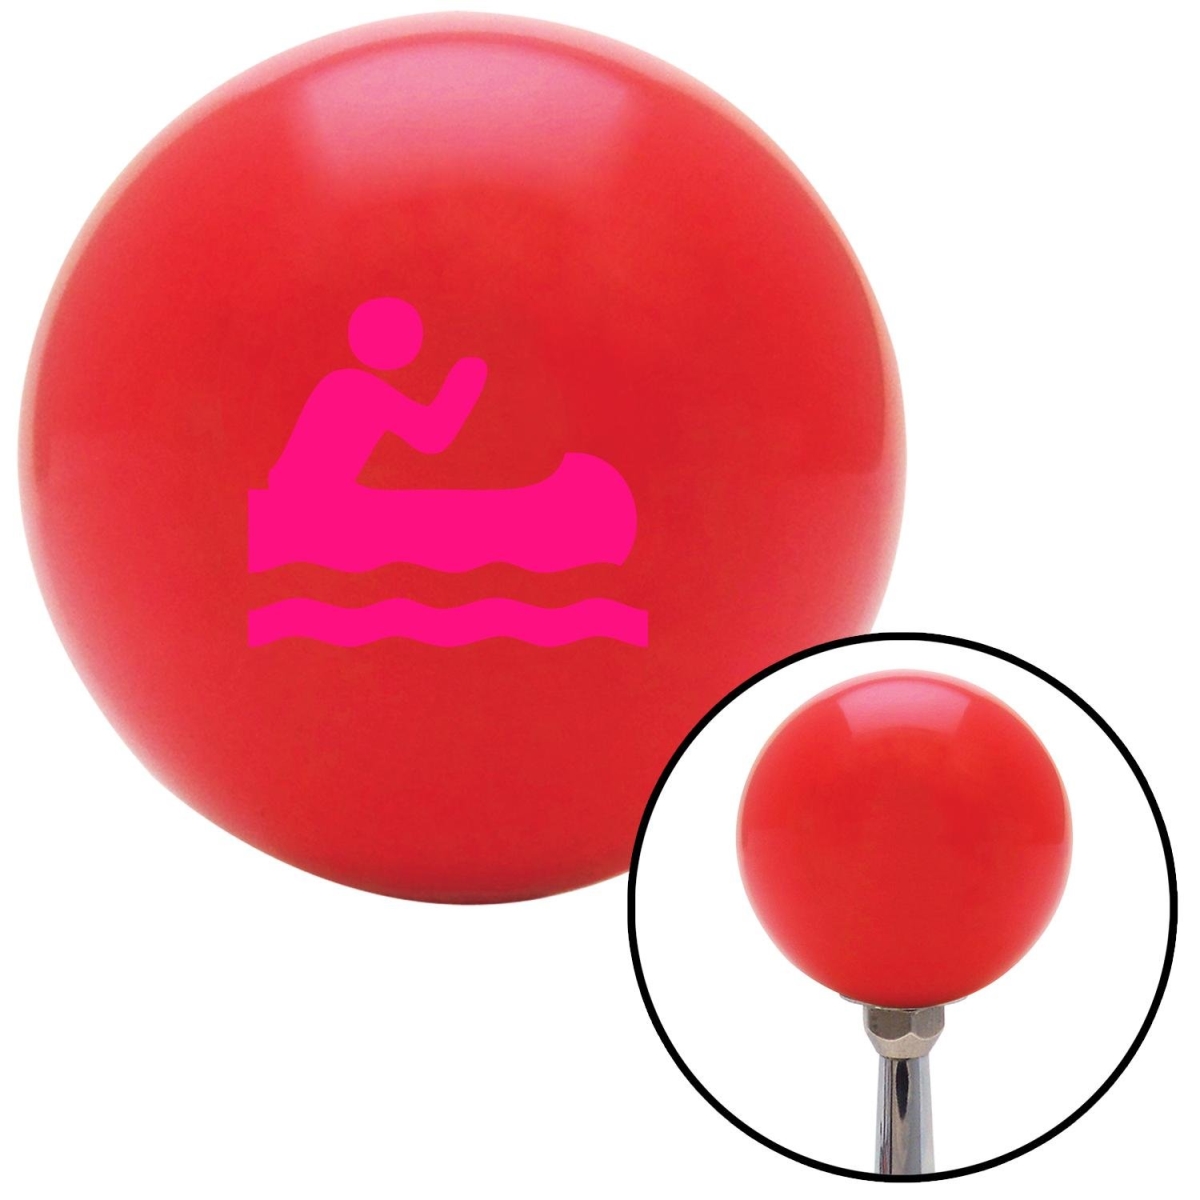 Picture of American Shifter 101487 Pink Man in a Canoe Red Shift Knob with M16 x 1.5 Insert Shifter Auto Manual Custom